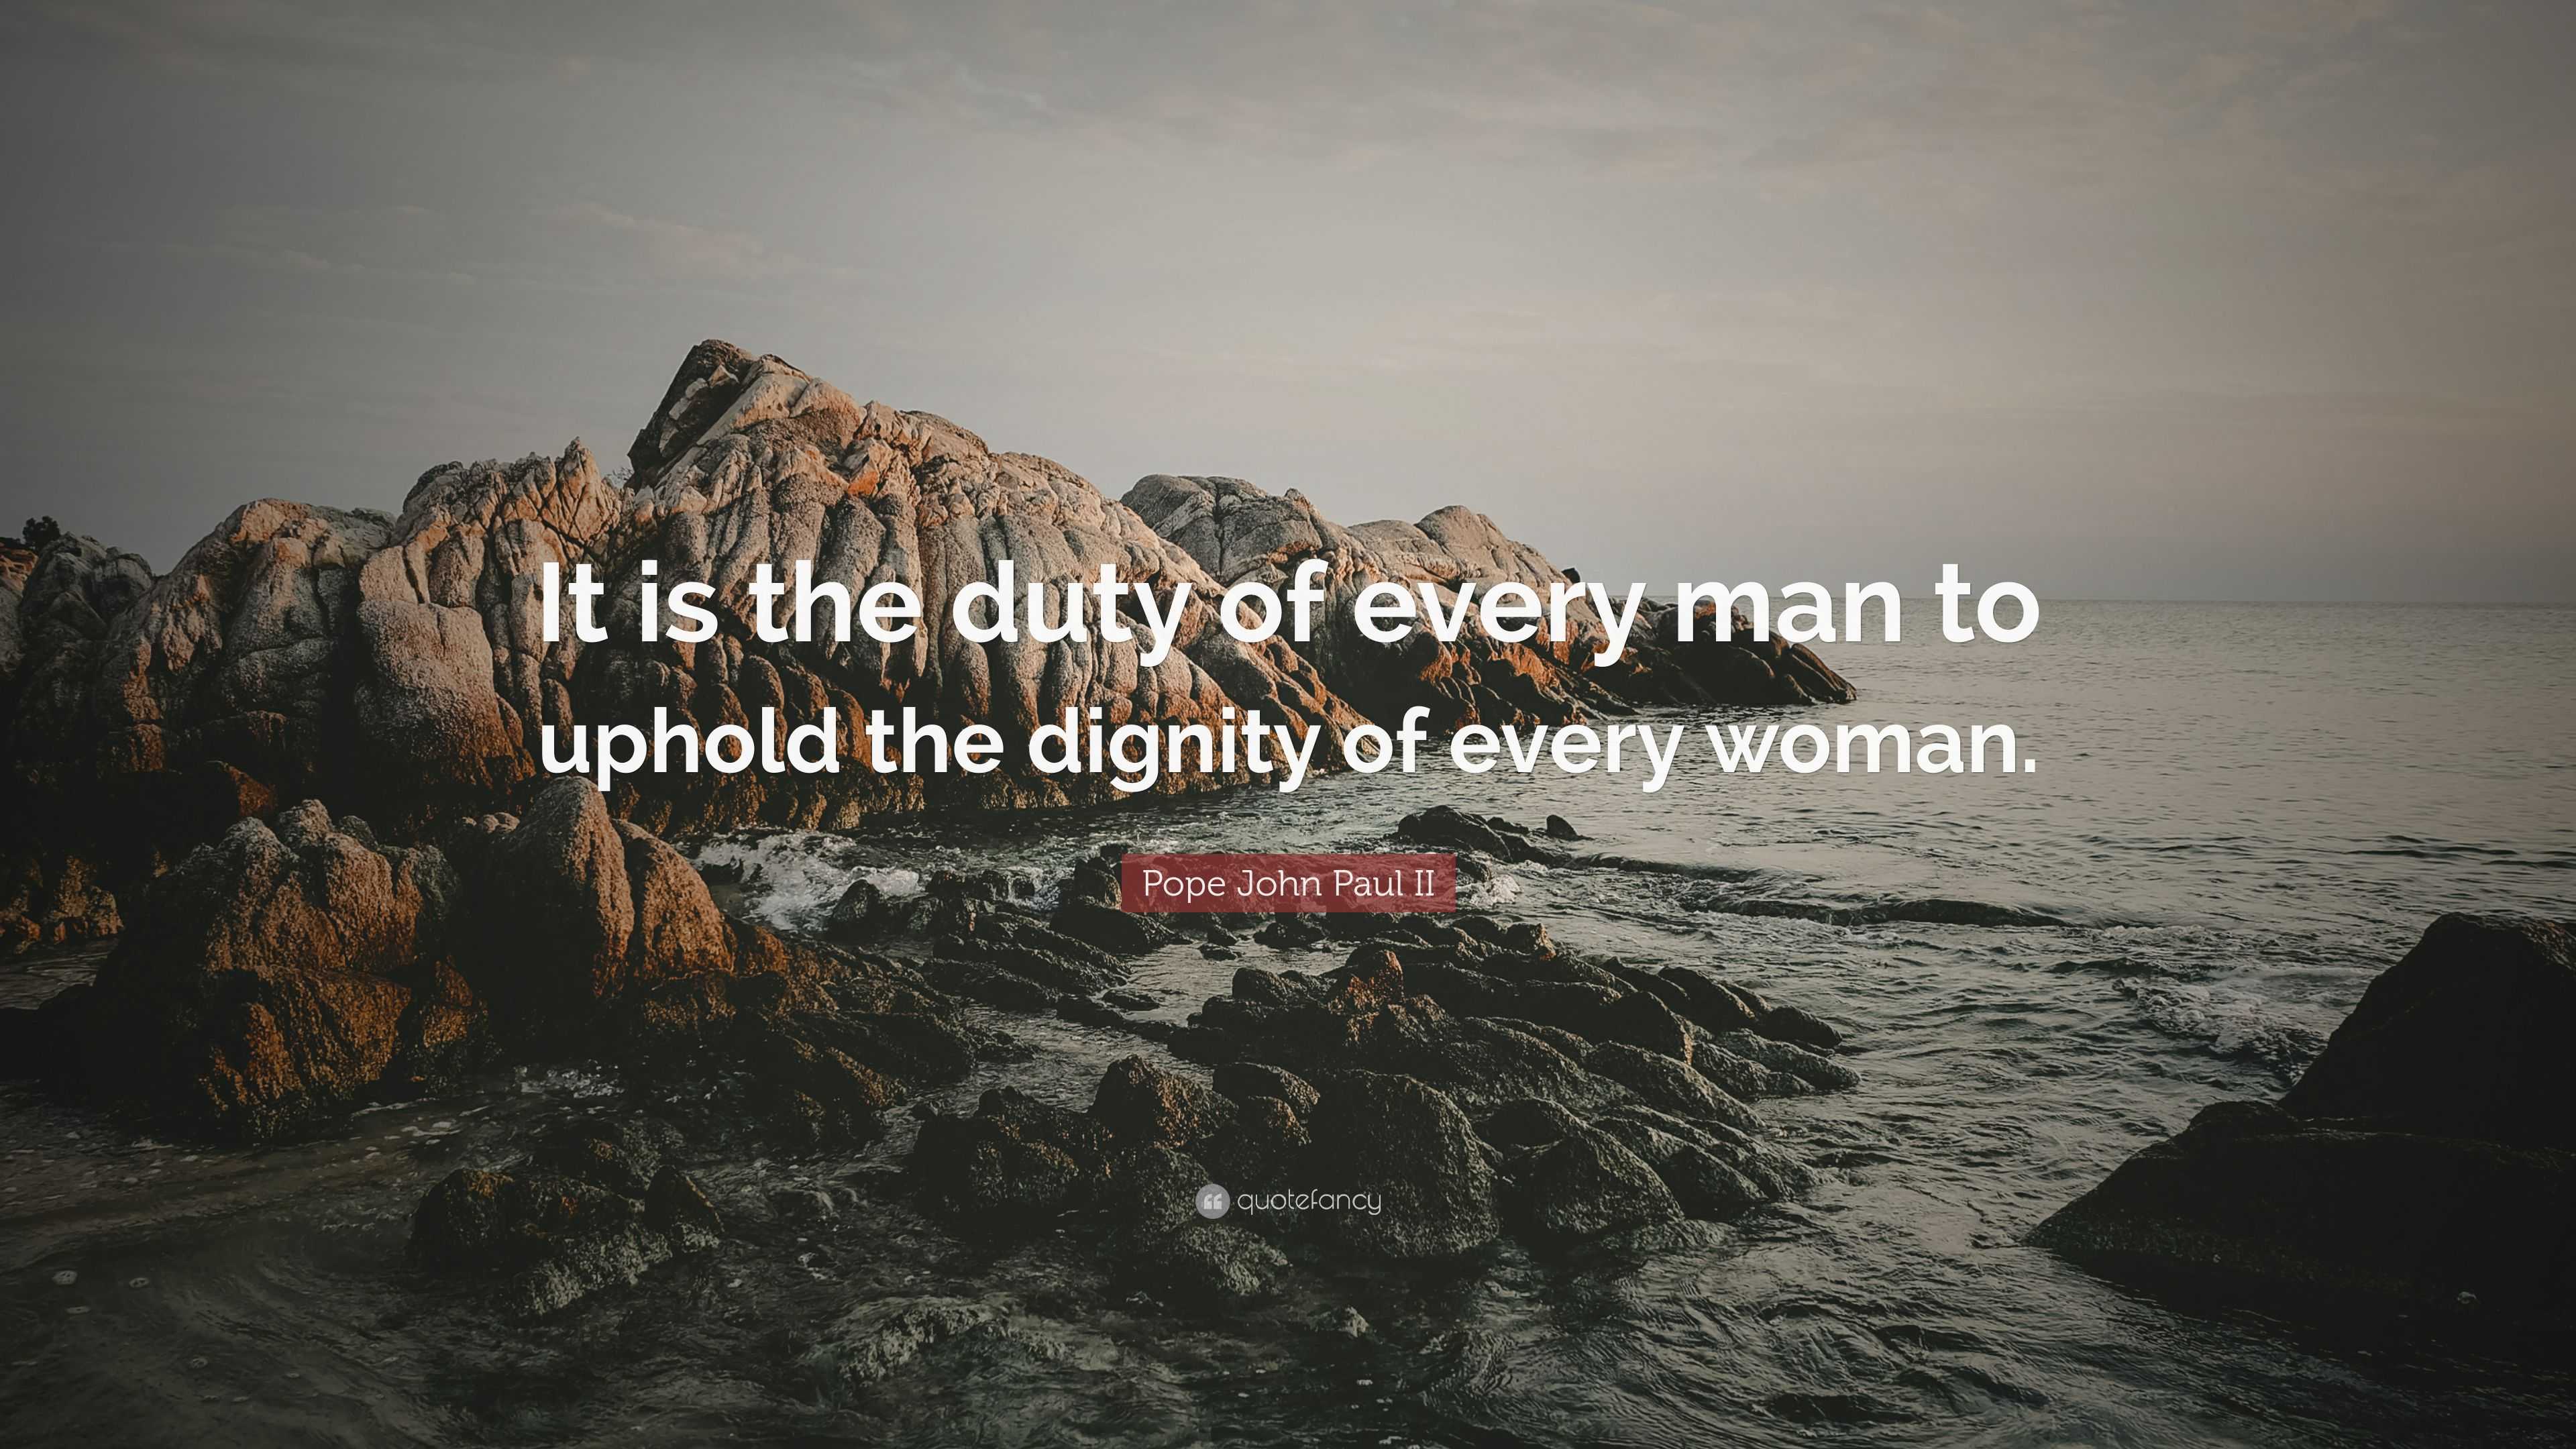 On the Dignity and Vocation of Women by Pope John Paul II